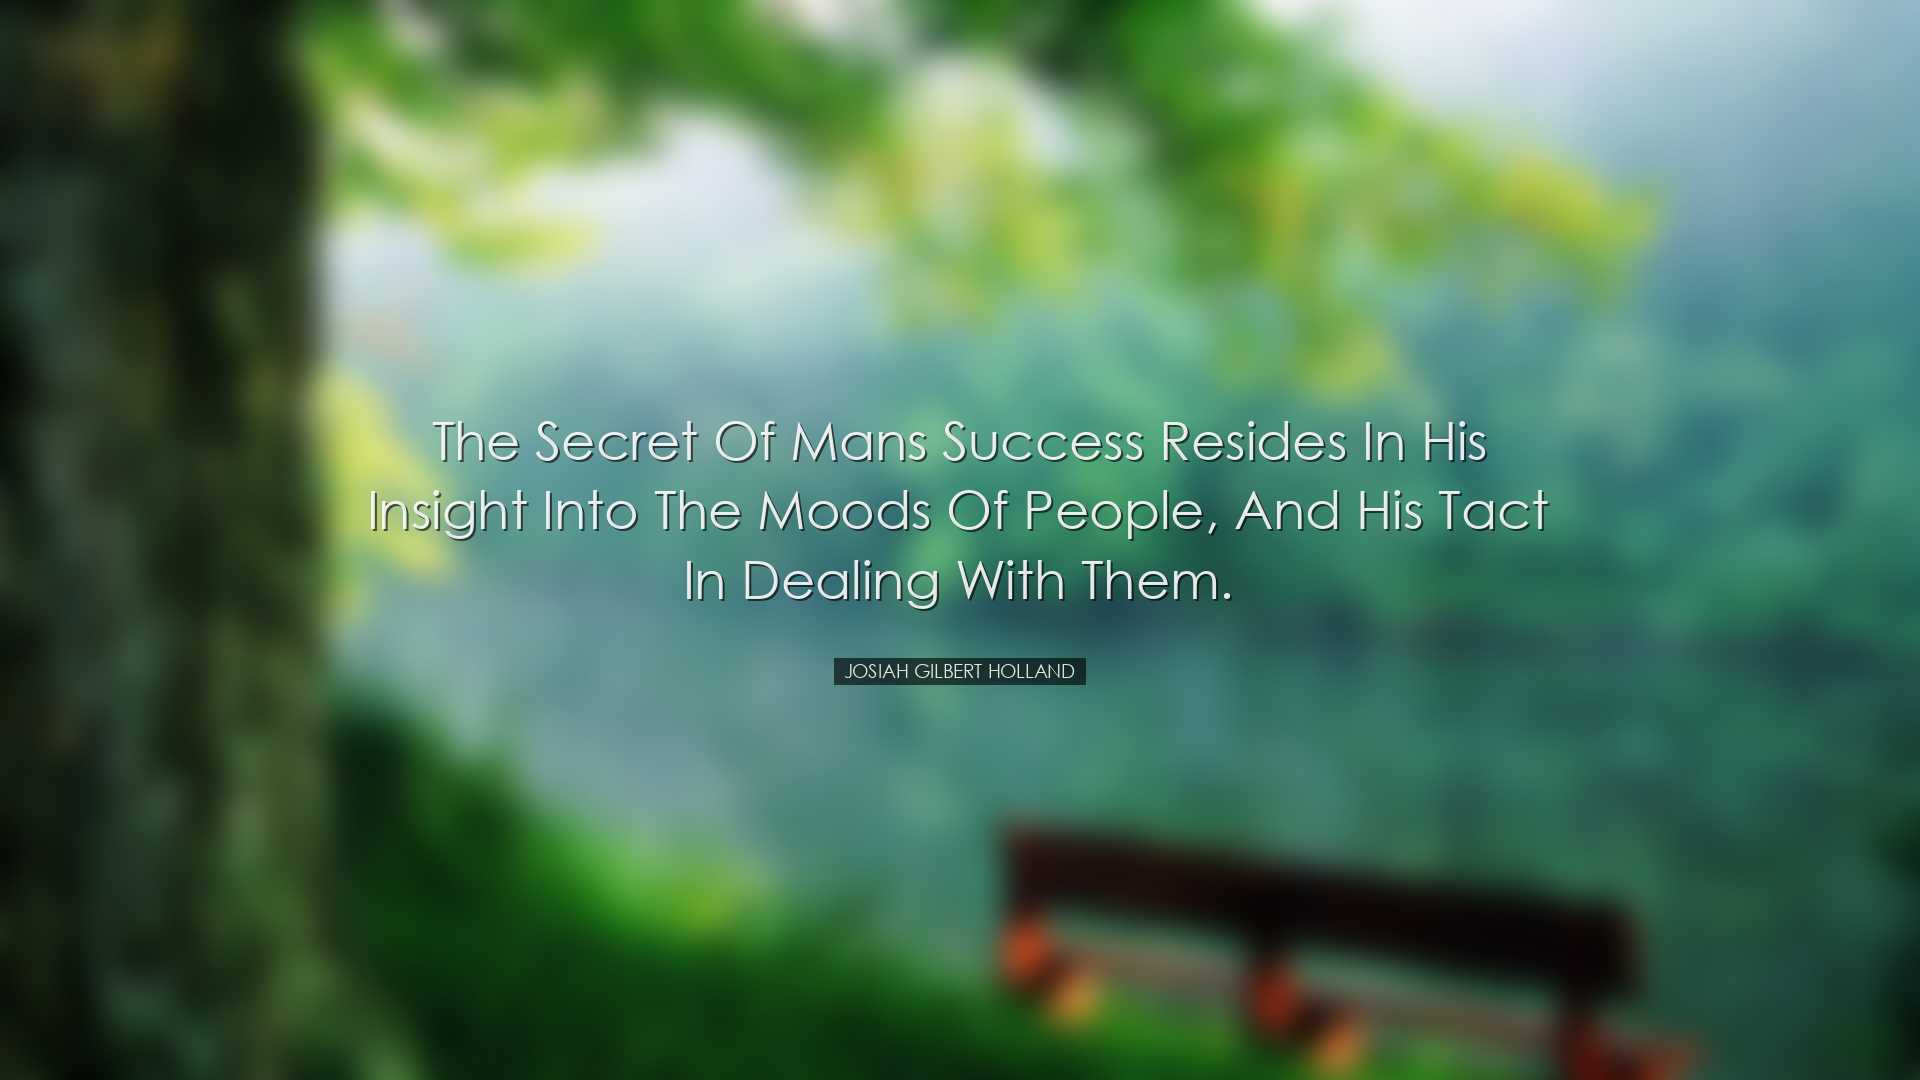 The secret of mans success resides in his insight into the moods o